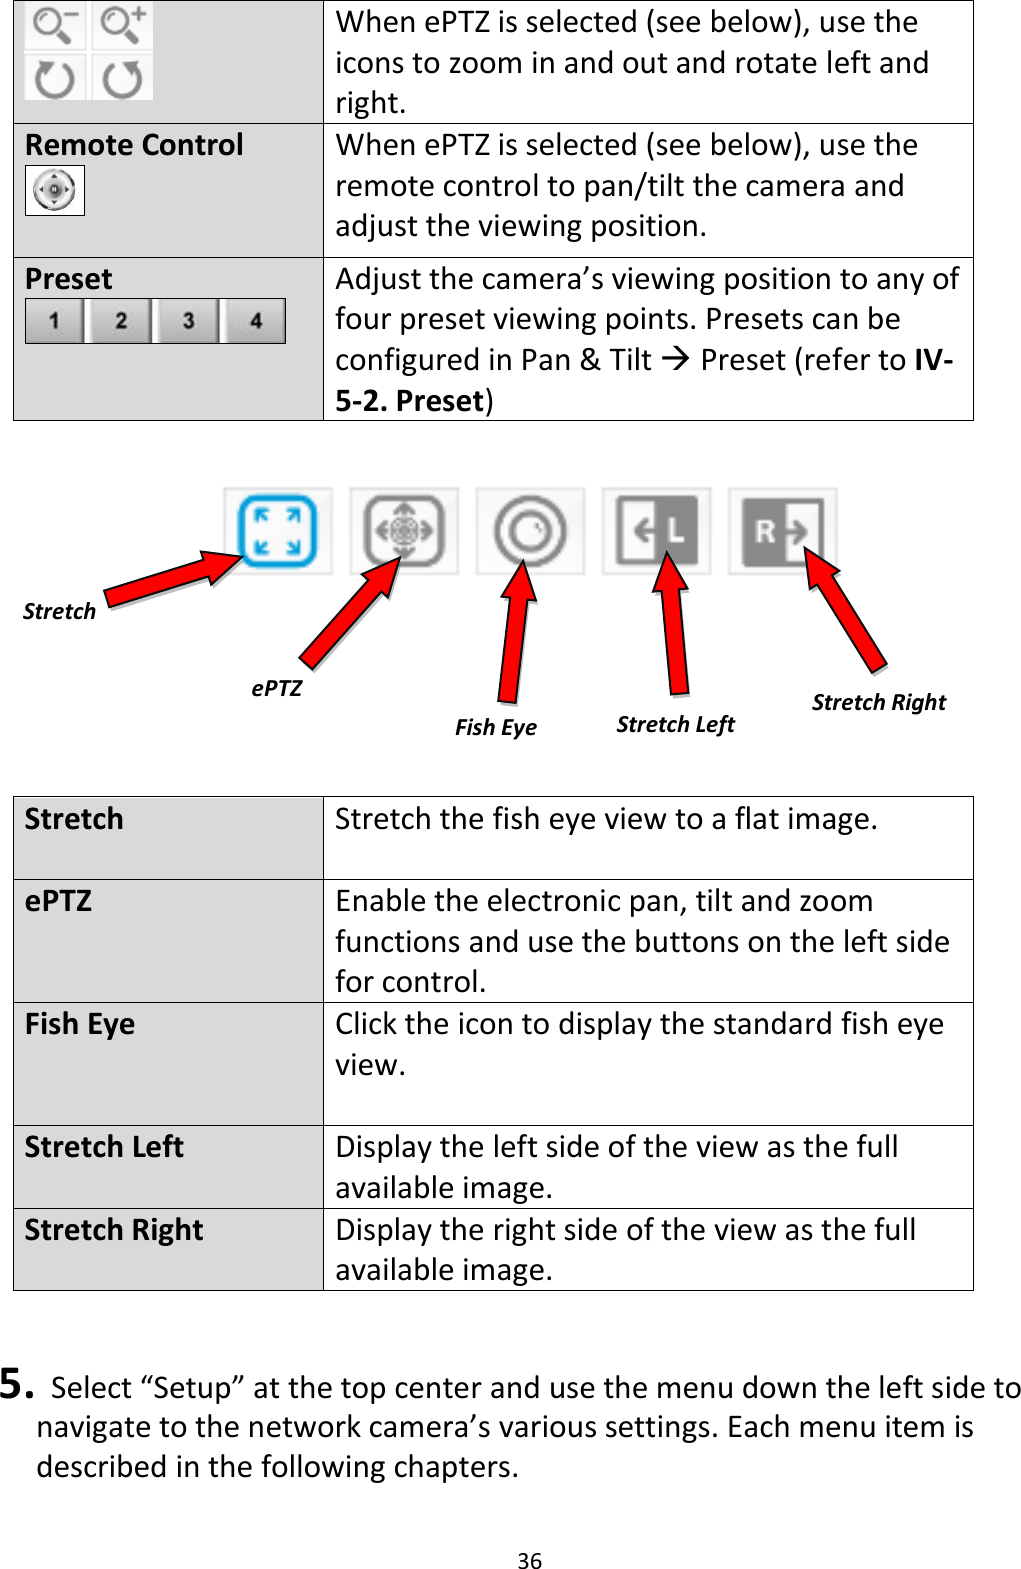 36   When ePTZ is selected (see below), use the icons to zoom in and out and rotate left and right. Remote Control   When ePTZ is selected (see below), use the remote control to pan/tilt the camera and adjust the viewing position. Preset   Adjust the camera’s viewing position to any of four preset viewing points. Presets can be configured in Pan &amp; Tilt  Preset (refer to IV-5-2. Preset)        Stretch  Stretch the fish eye view to a flat image. ePTZ  Enable the electronic pan, tilt and zoom functions and use the buttons on the left side for control. Fish Eye   Click the icon to display the standard fish eye view. Stretch Left Display the left side of the view as the full available image. Stretch Right Display the right side of the view as the full available image.  5.   Select “Setup” at the top center and use the menu down the left side to navigate to the network camera’s various settings. Each menu item is described in the following chapters.  ePTZ Fish Eye Stretch Right Stretch Left Stretch 